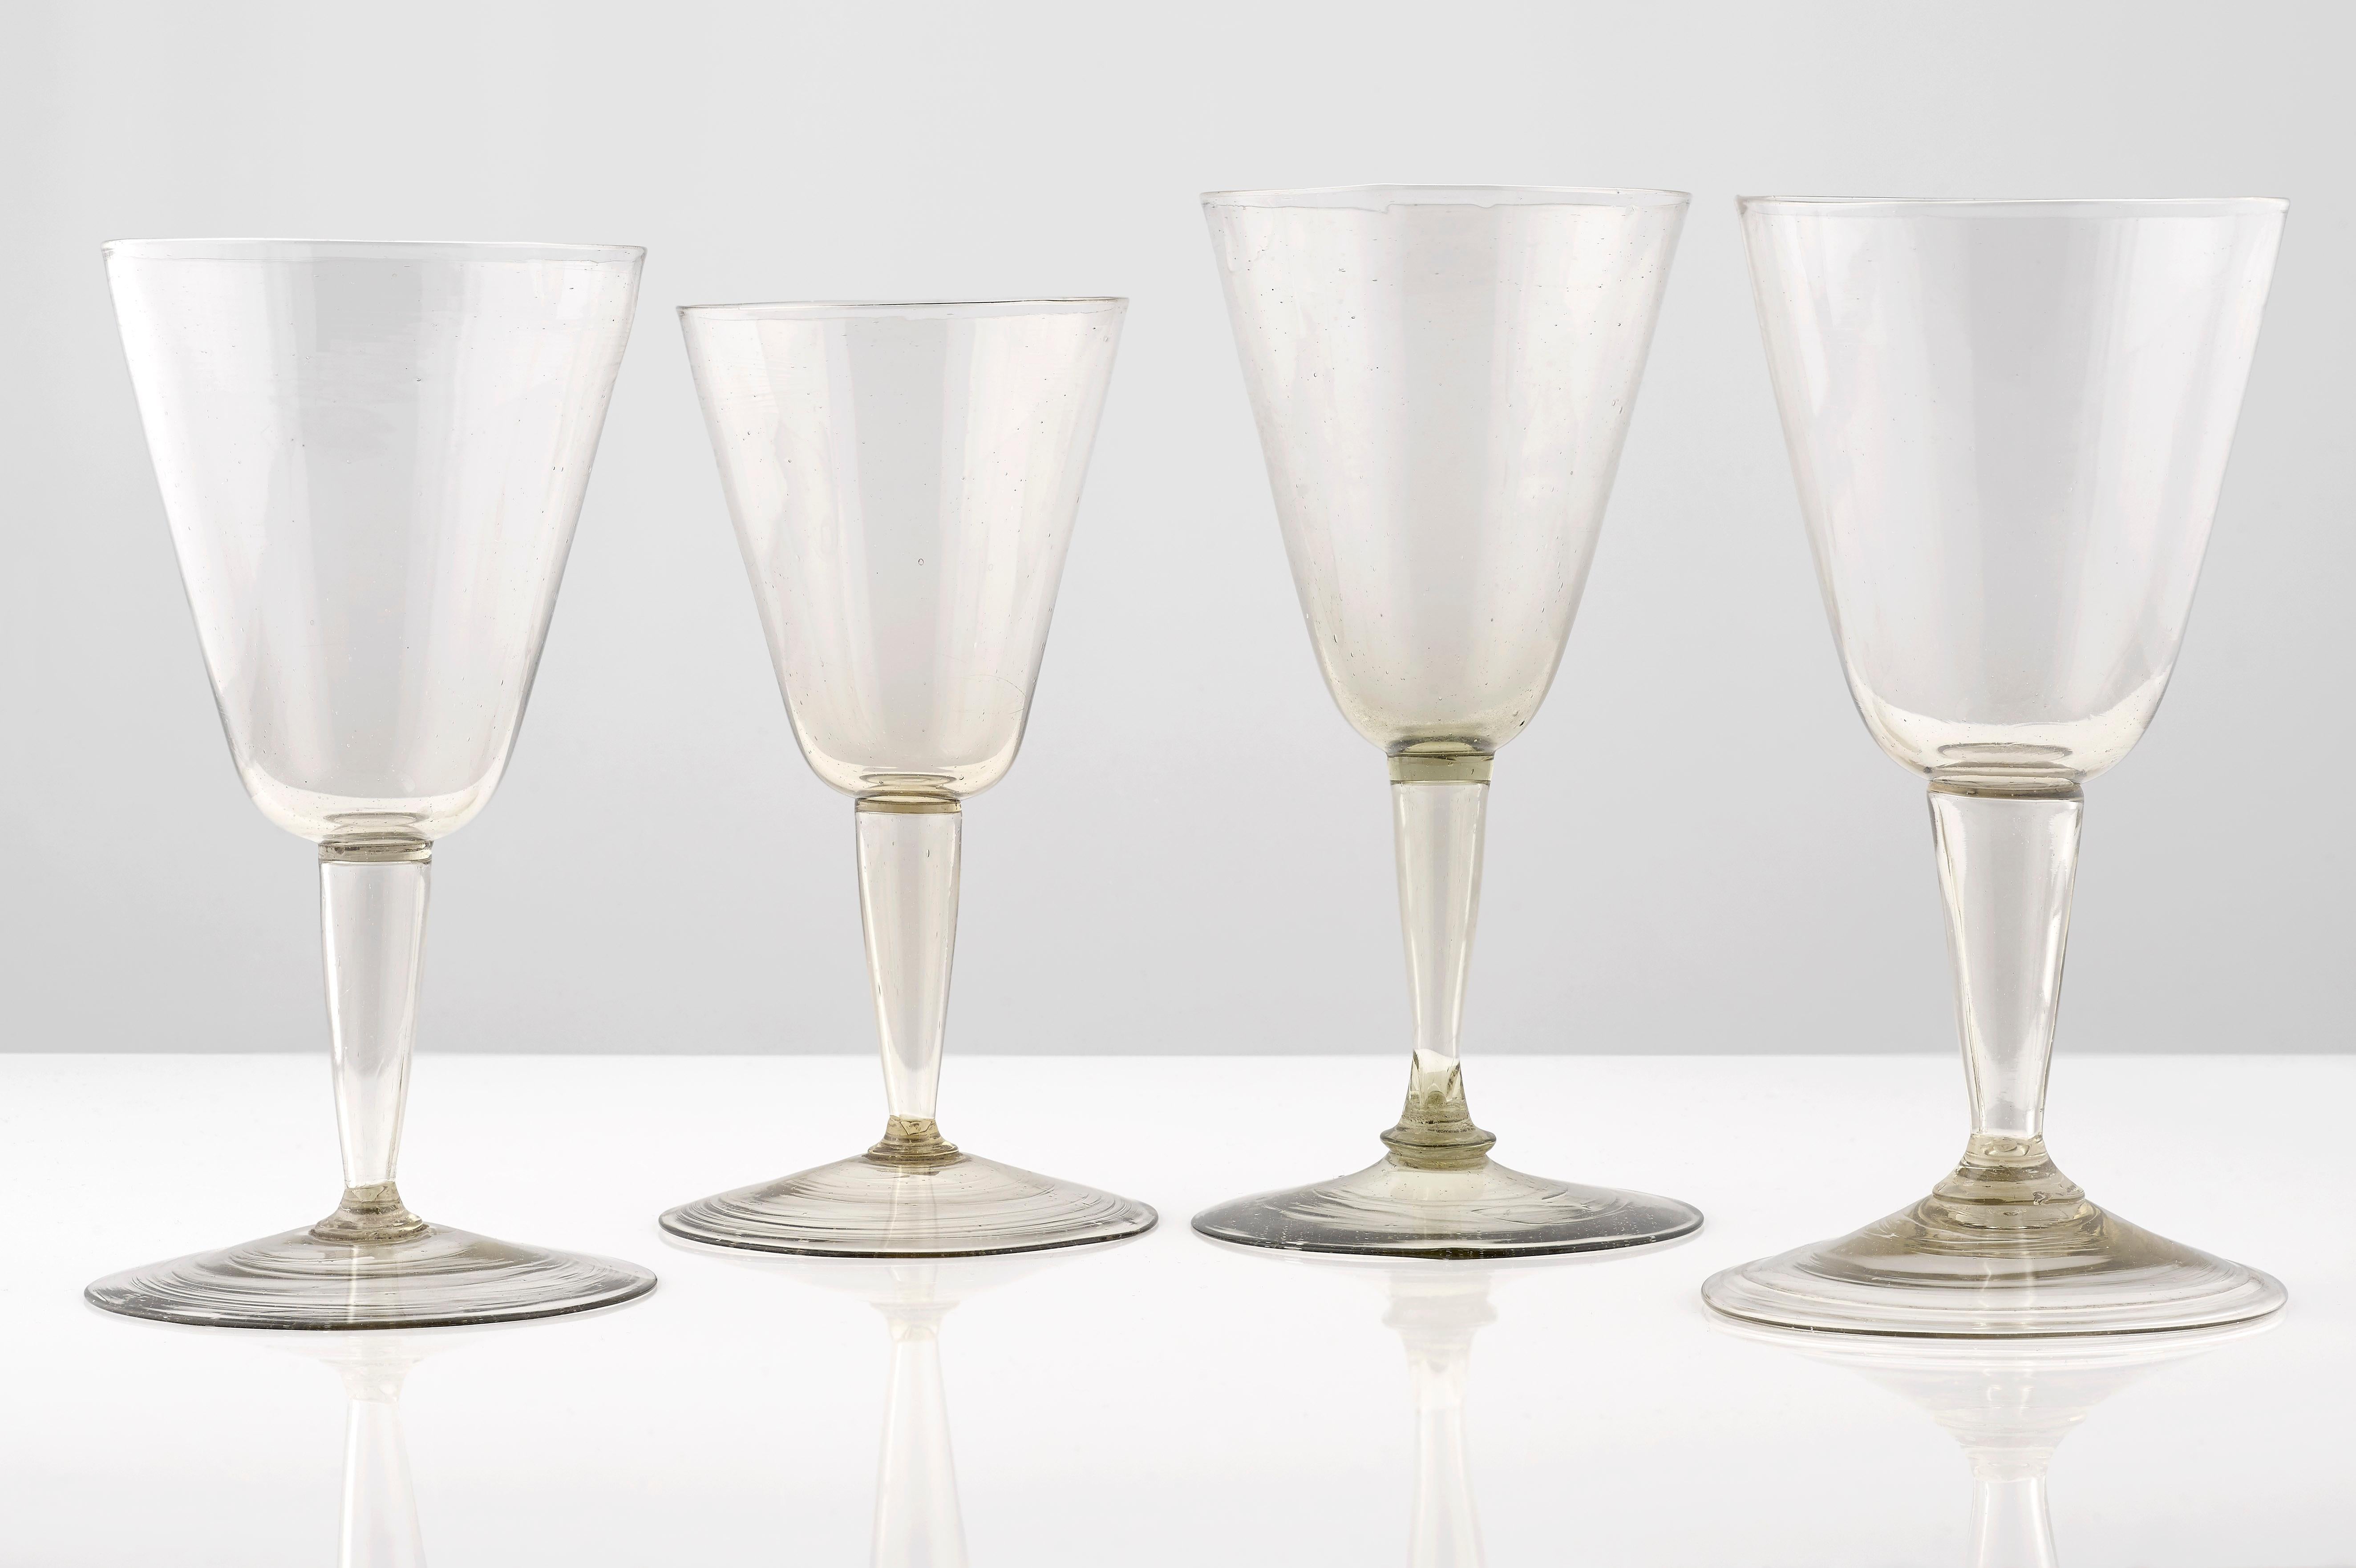 18th Century and Earlier An unusual 'set' of 4 Cristallo glasses Venetian early 17th century